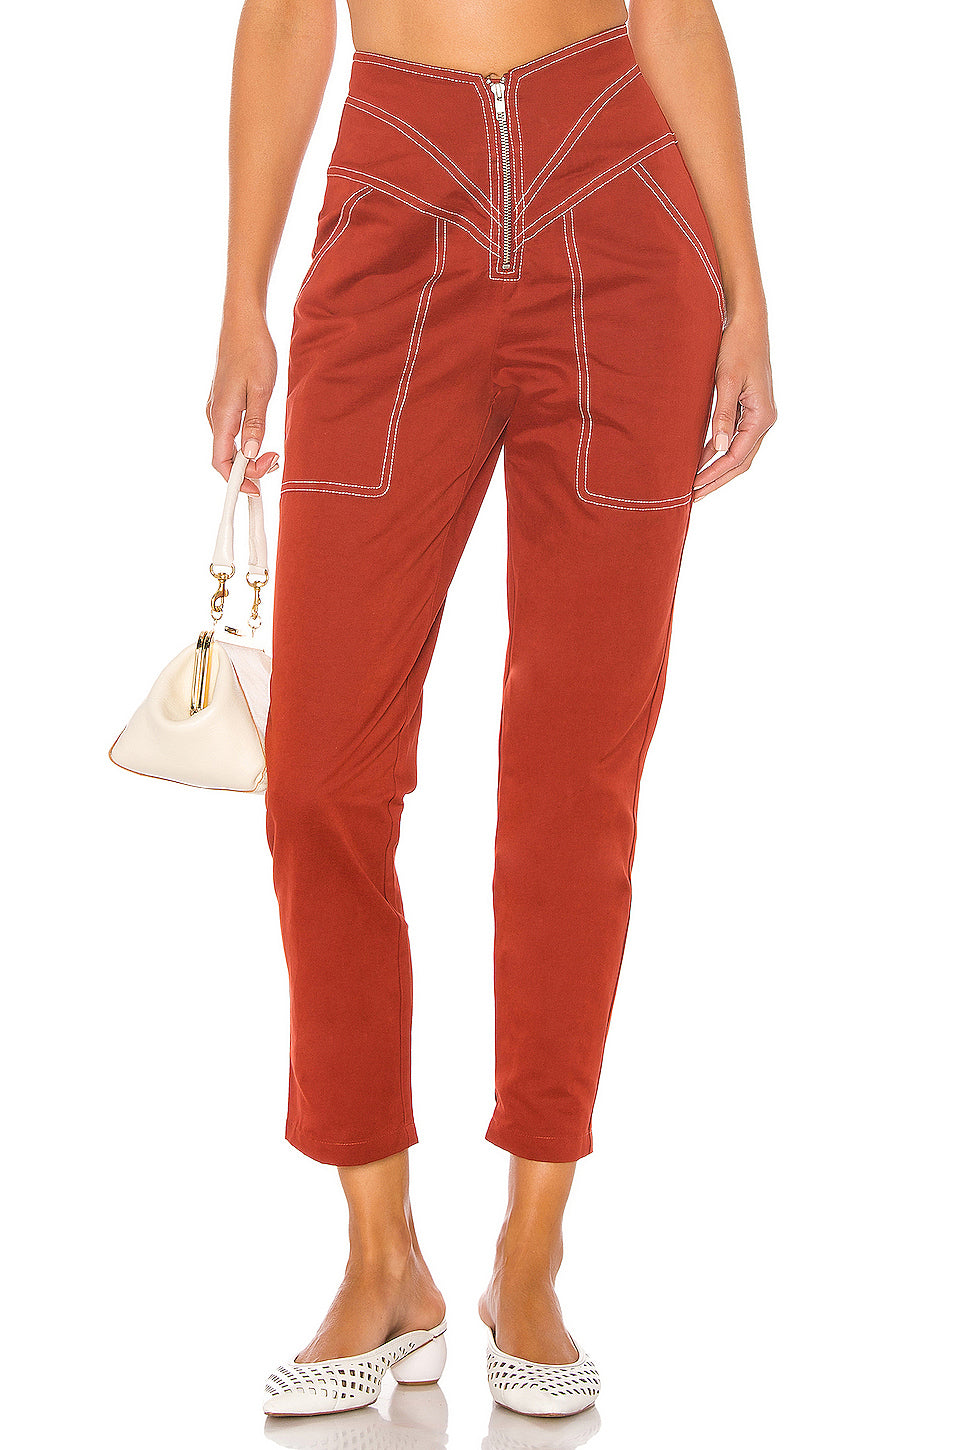 The Solana Pant in BRICK RED